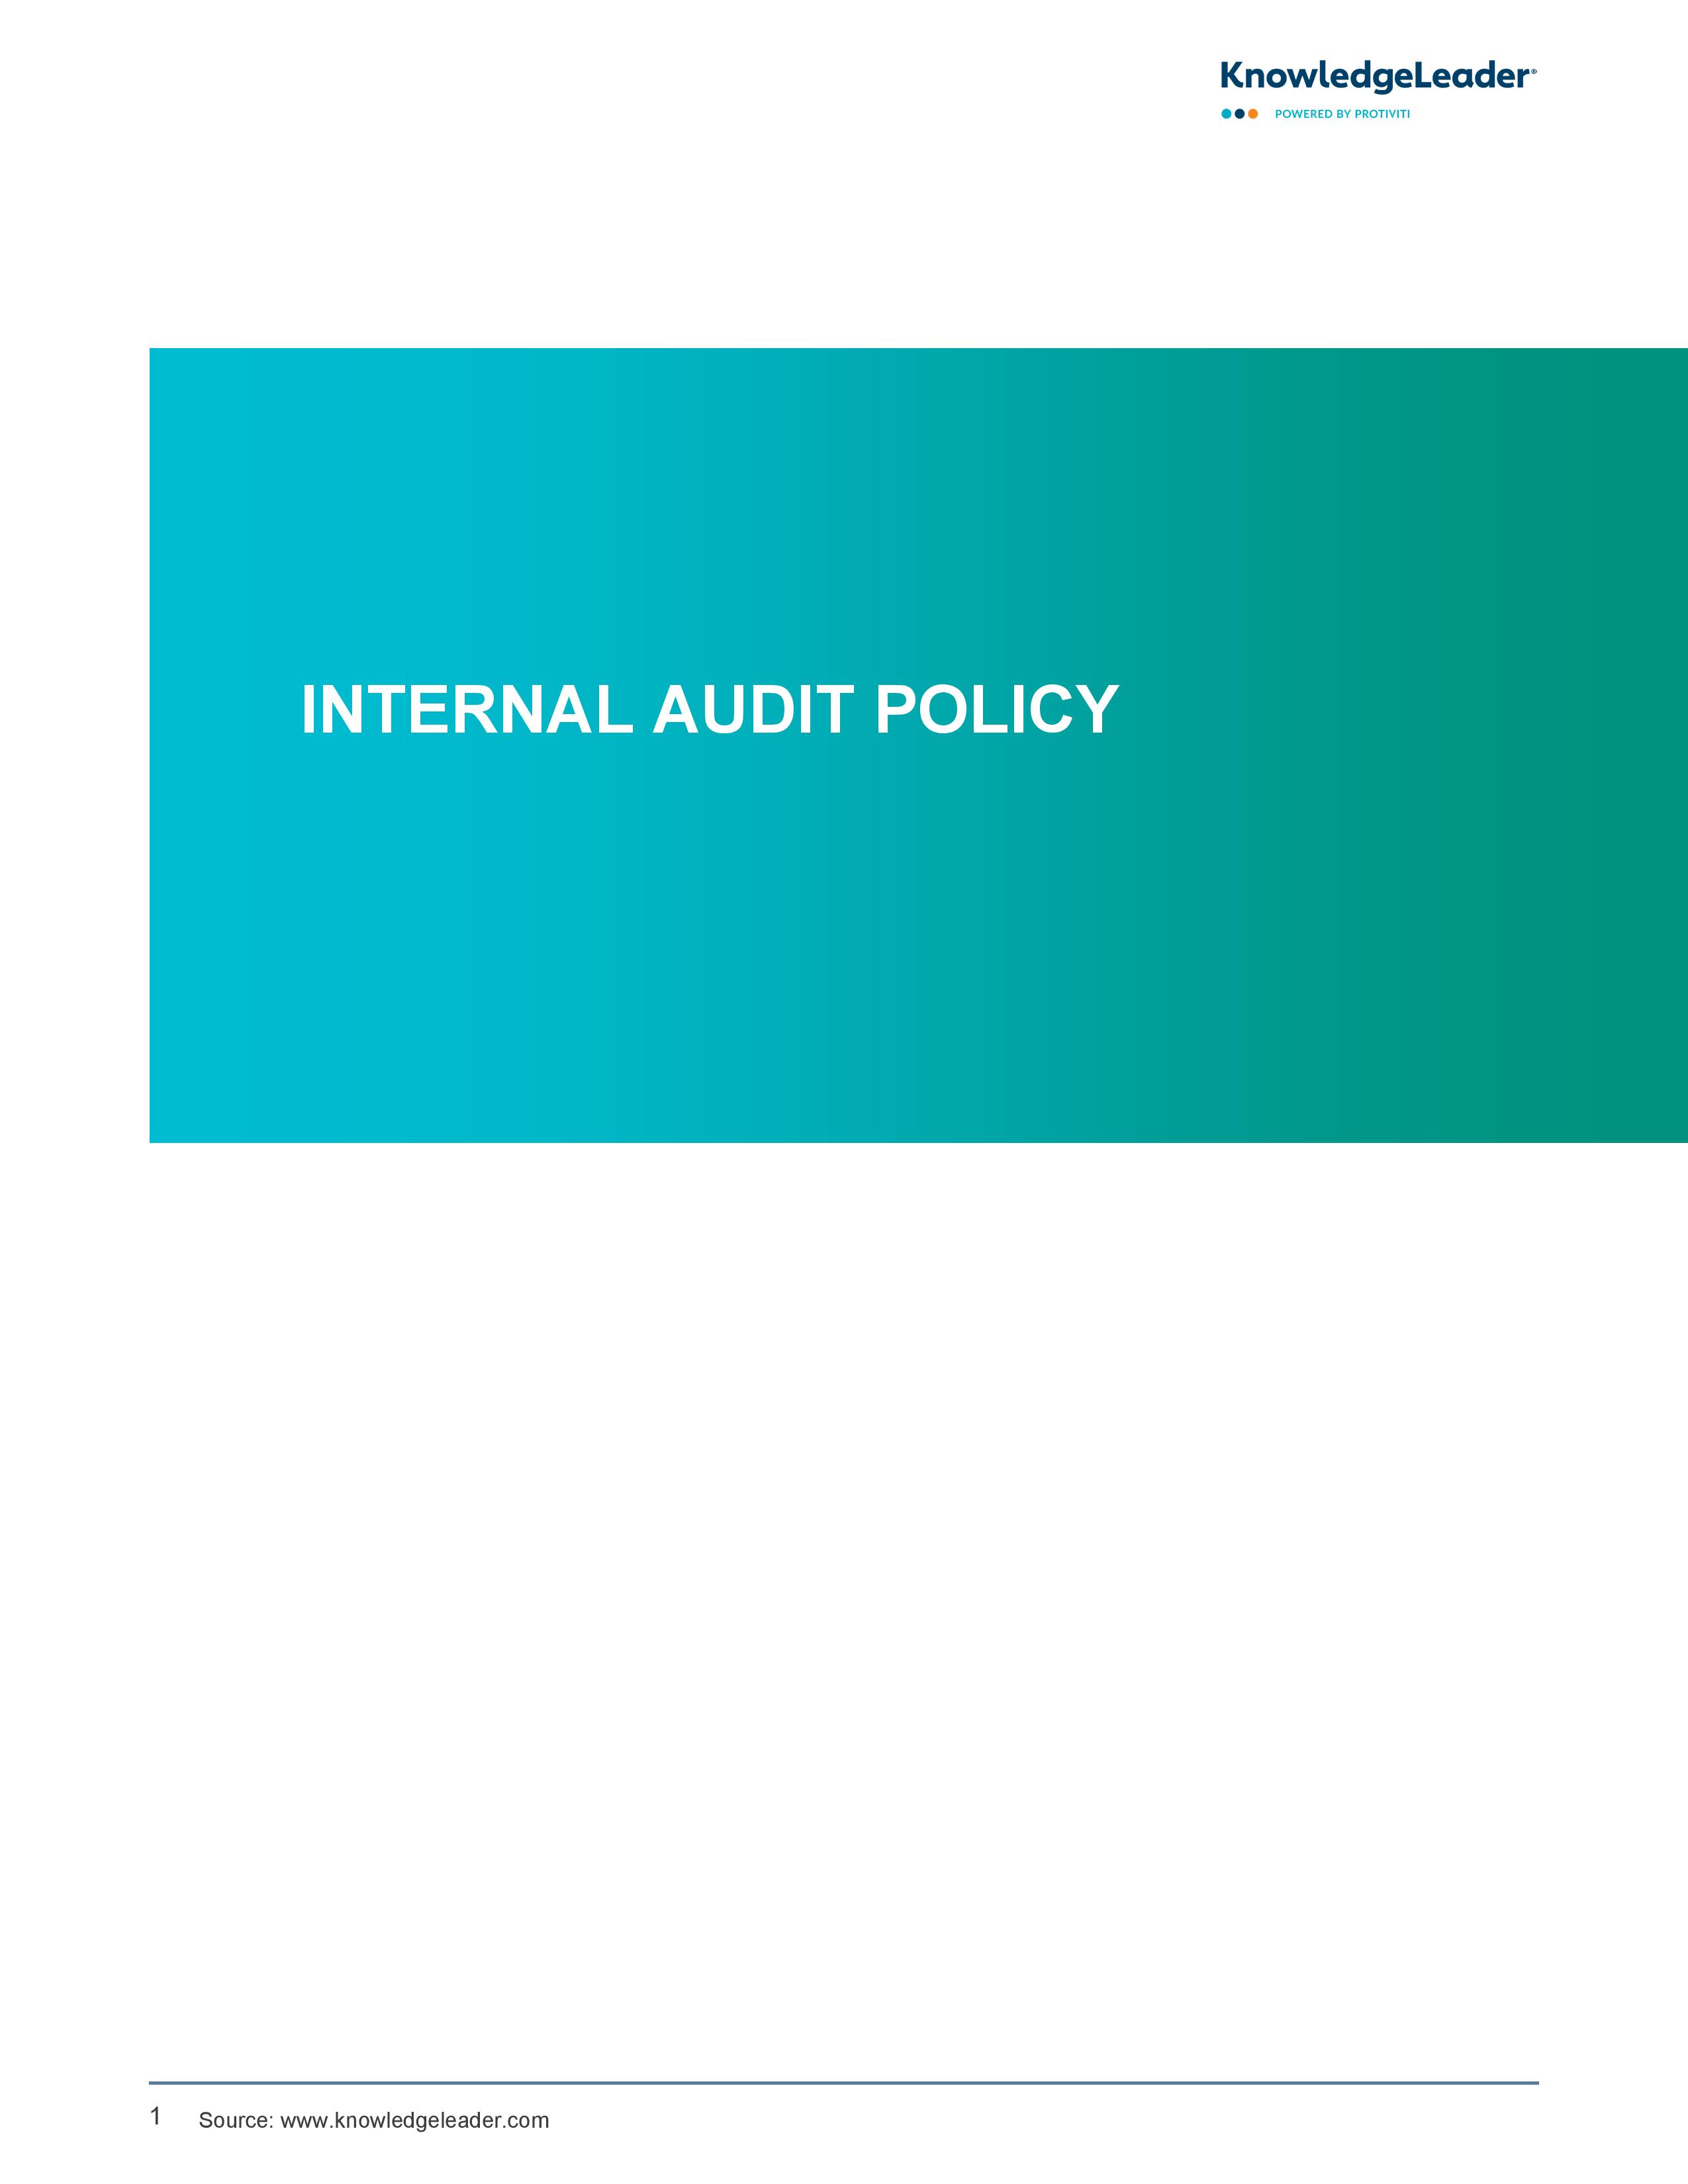 screenshot of the first page of Internal Audit Policy